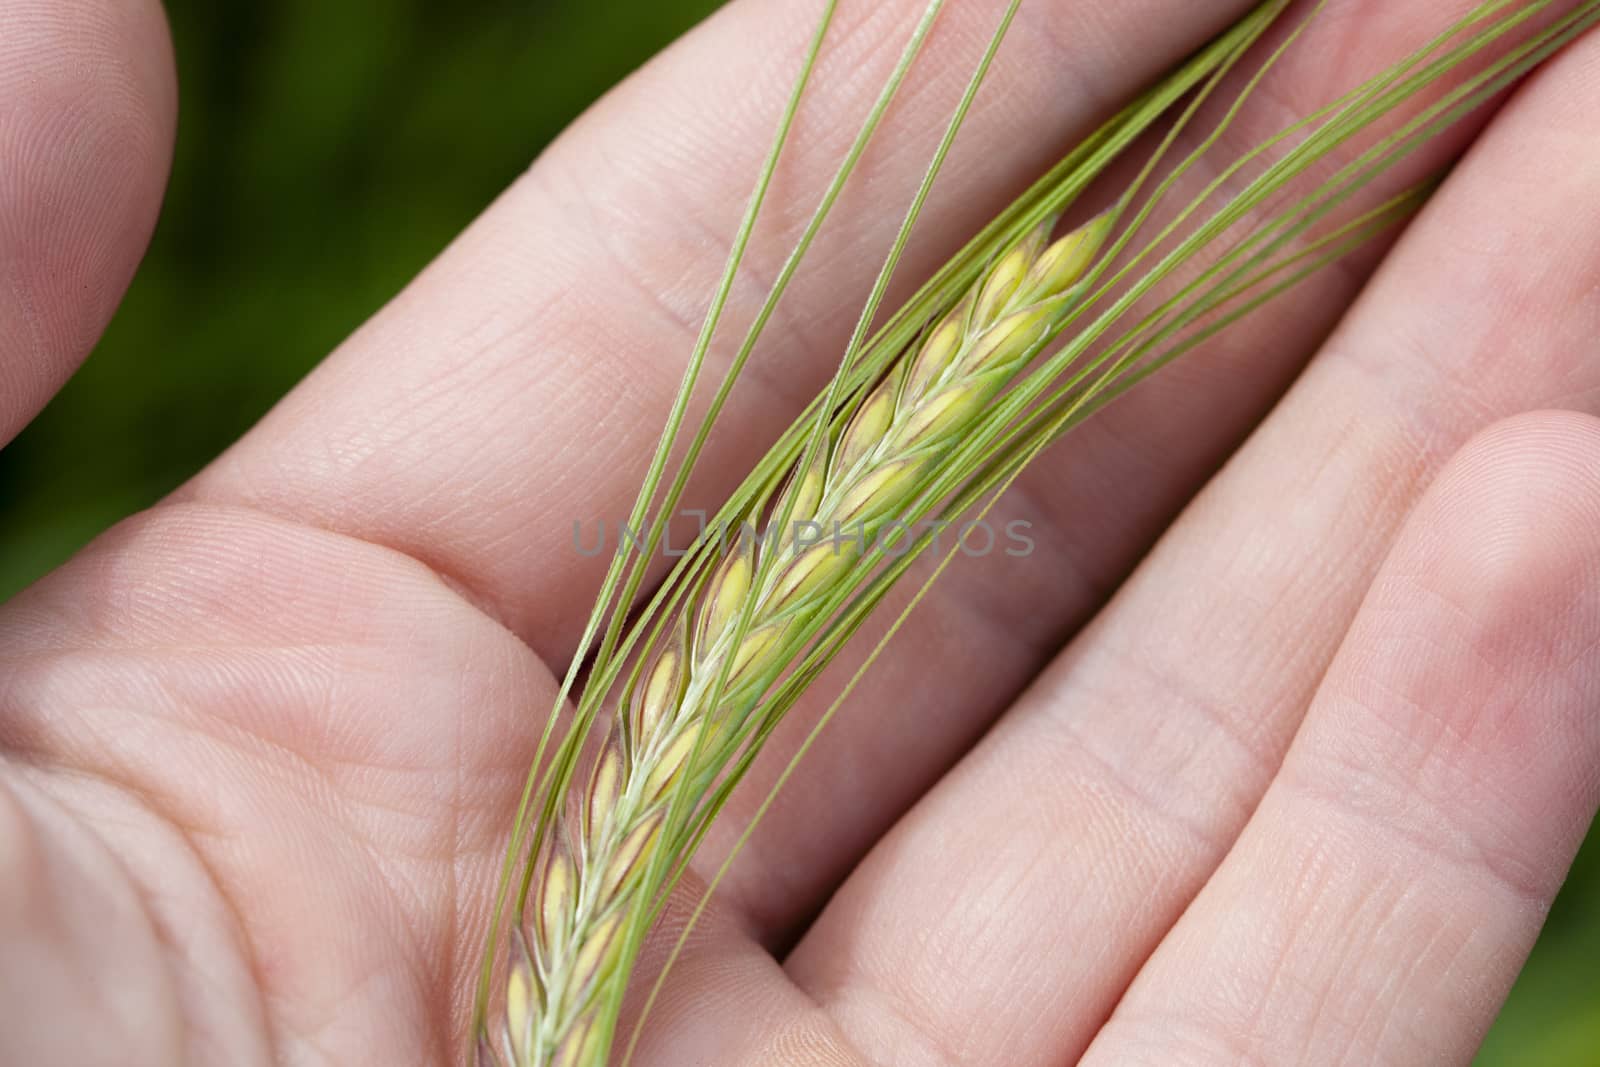   the green unripe ear of wheat lying in a hand of the person. small depth of sharpness